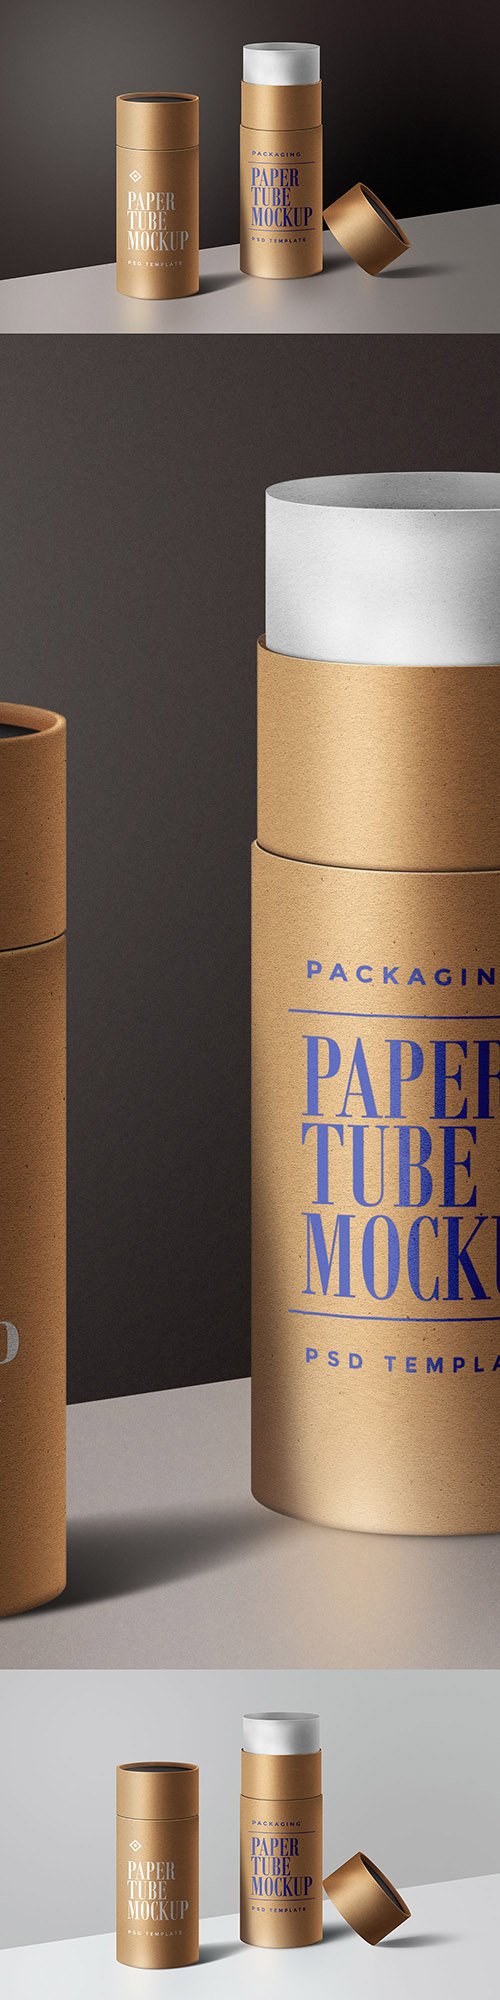 PSD Mock-Up - Paper Tube Packaging